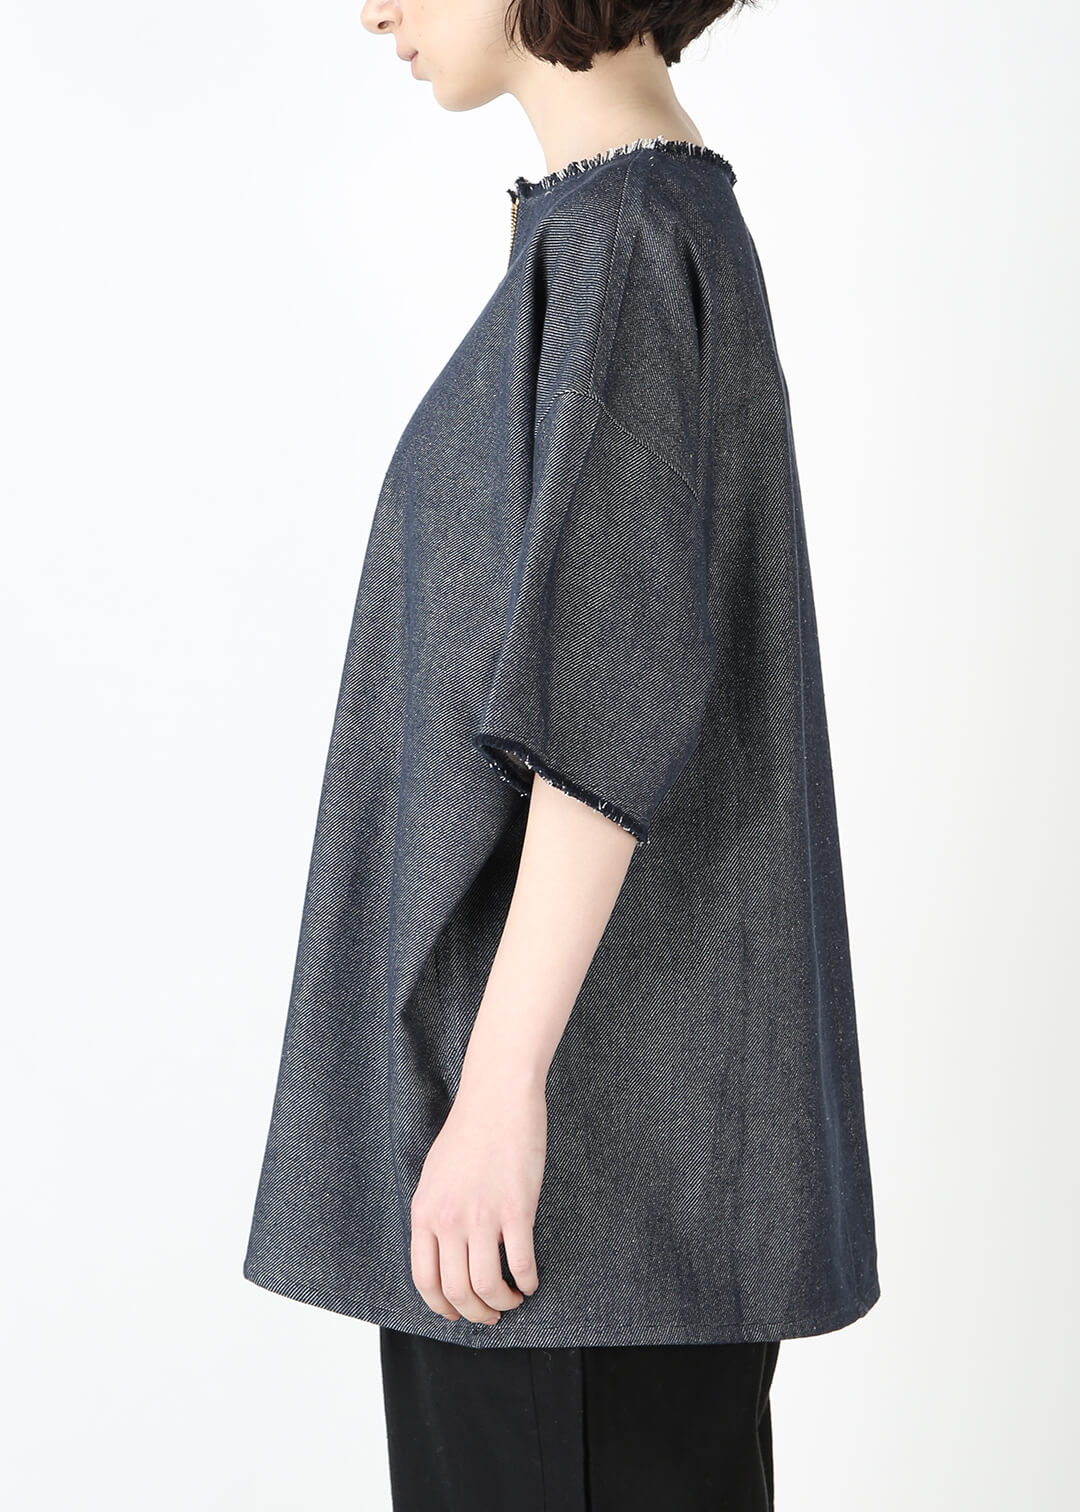 Rinne Zip-up Tops Recycled Denim